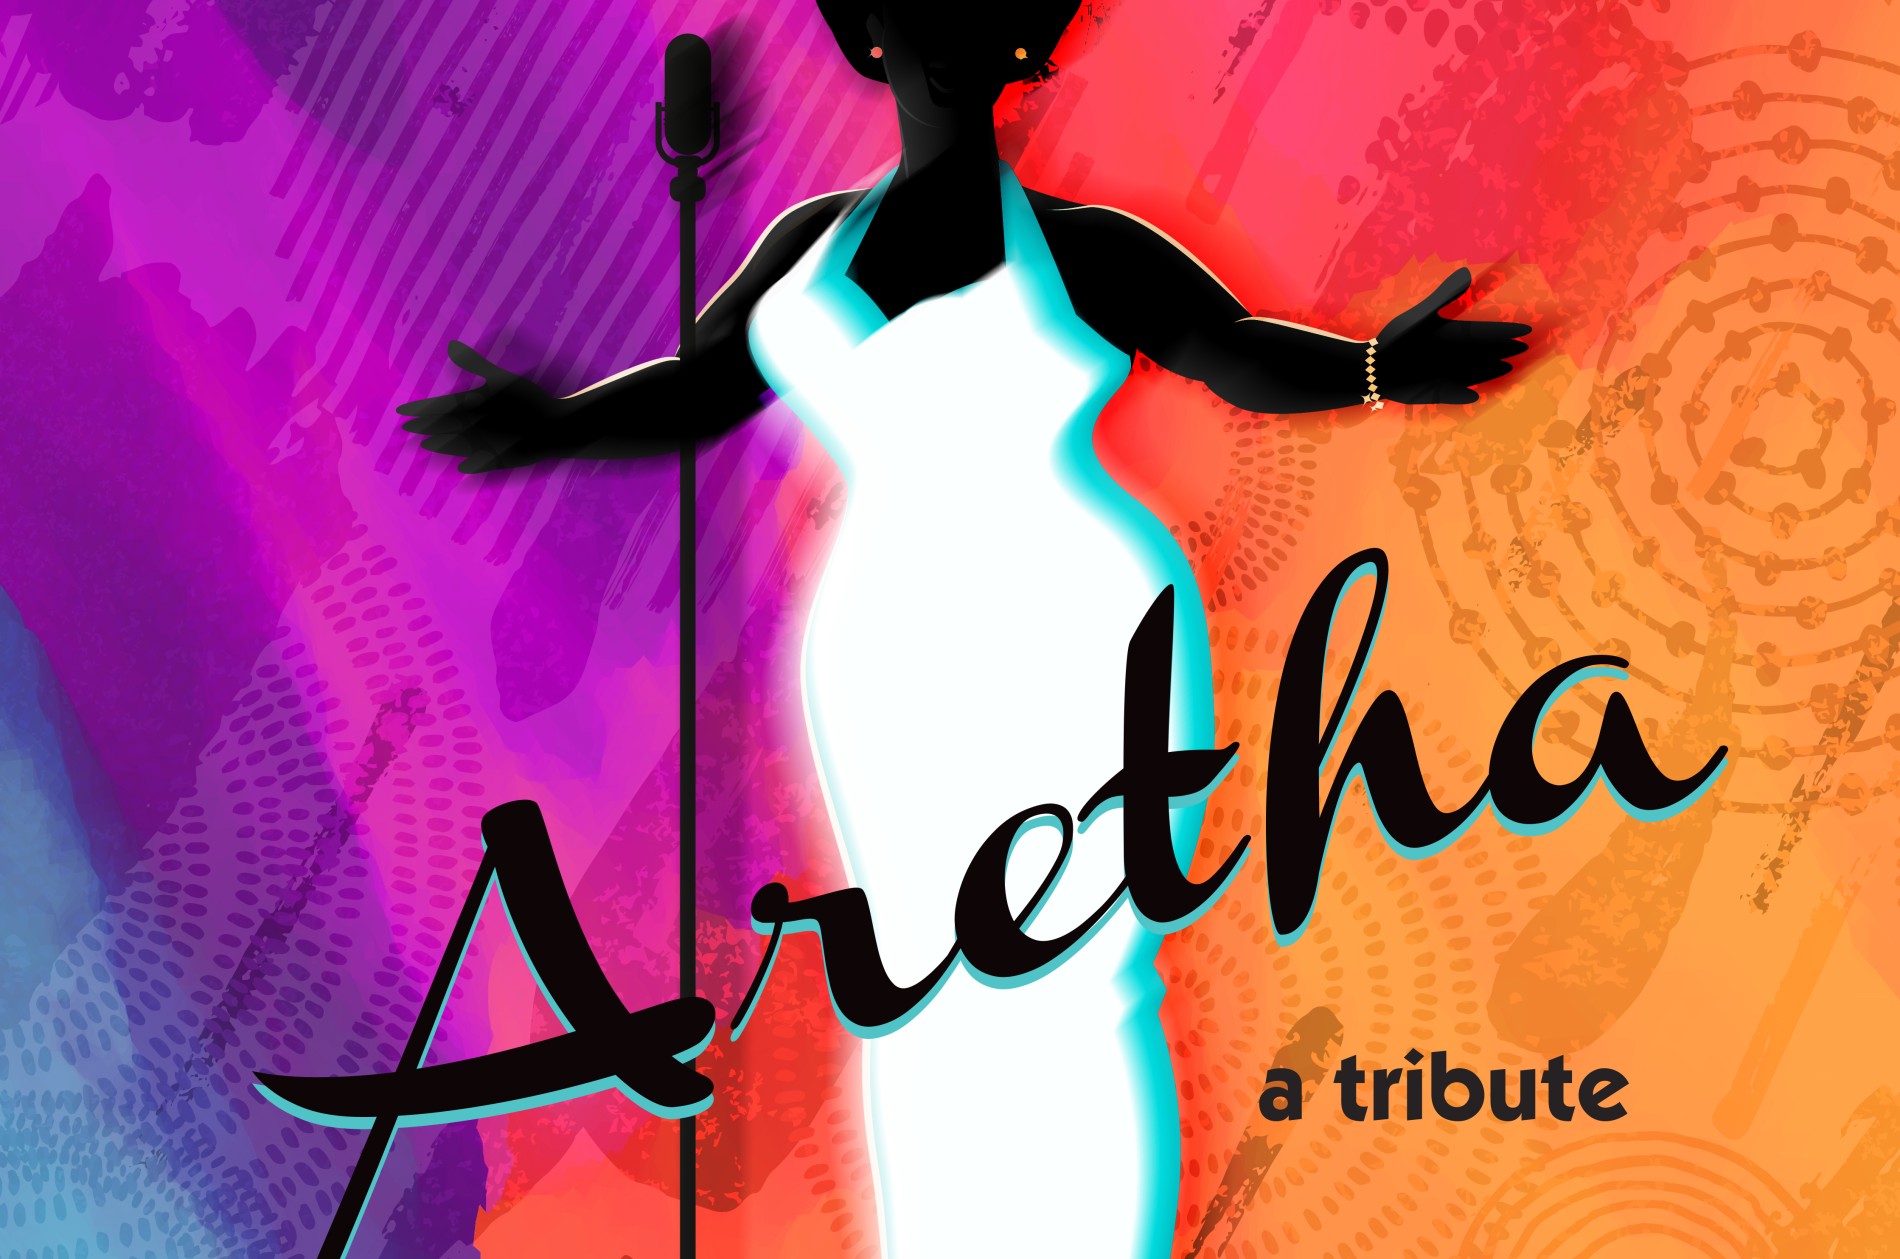 Aretha, a tribute - art image of singer at a microphone in a white dress against a field of color